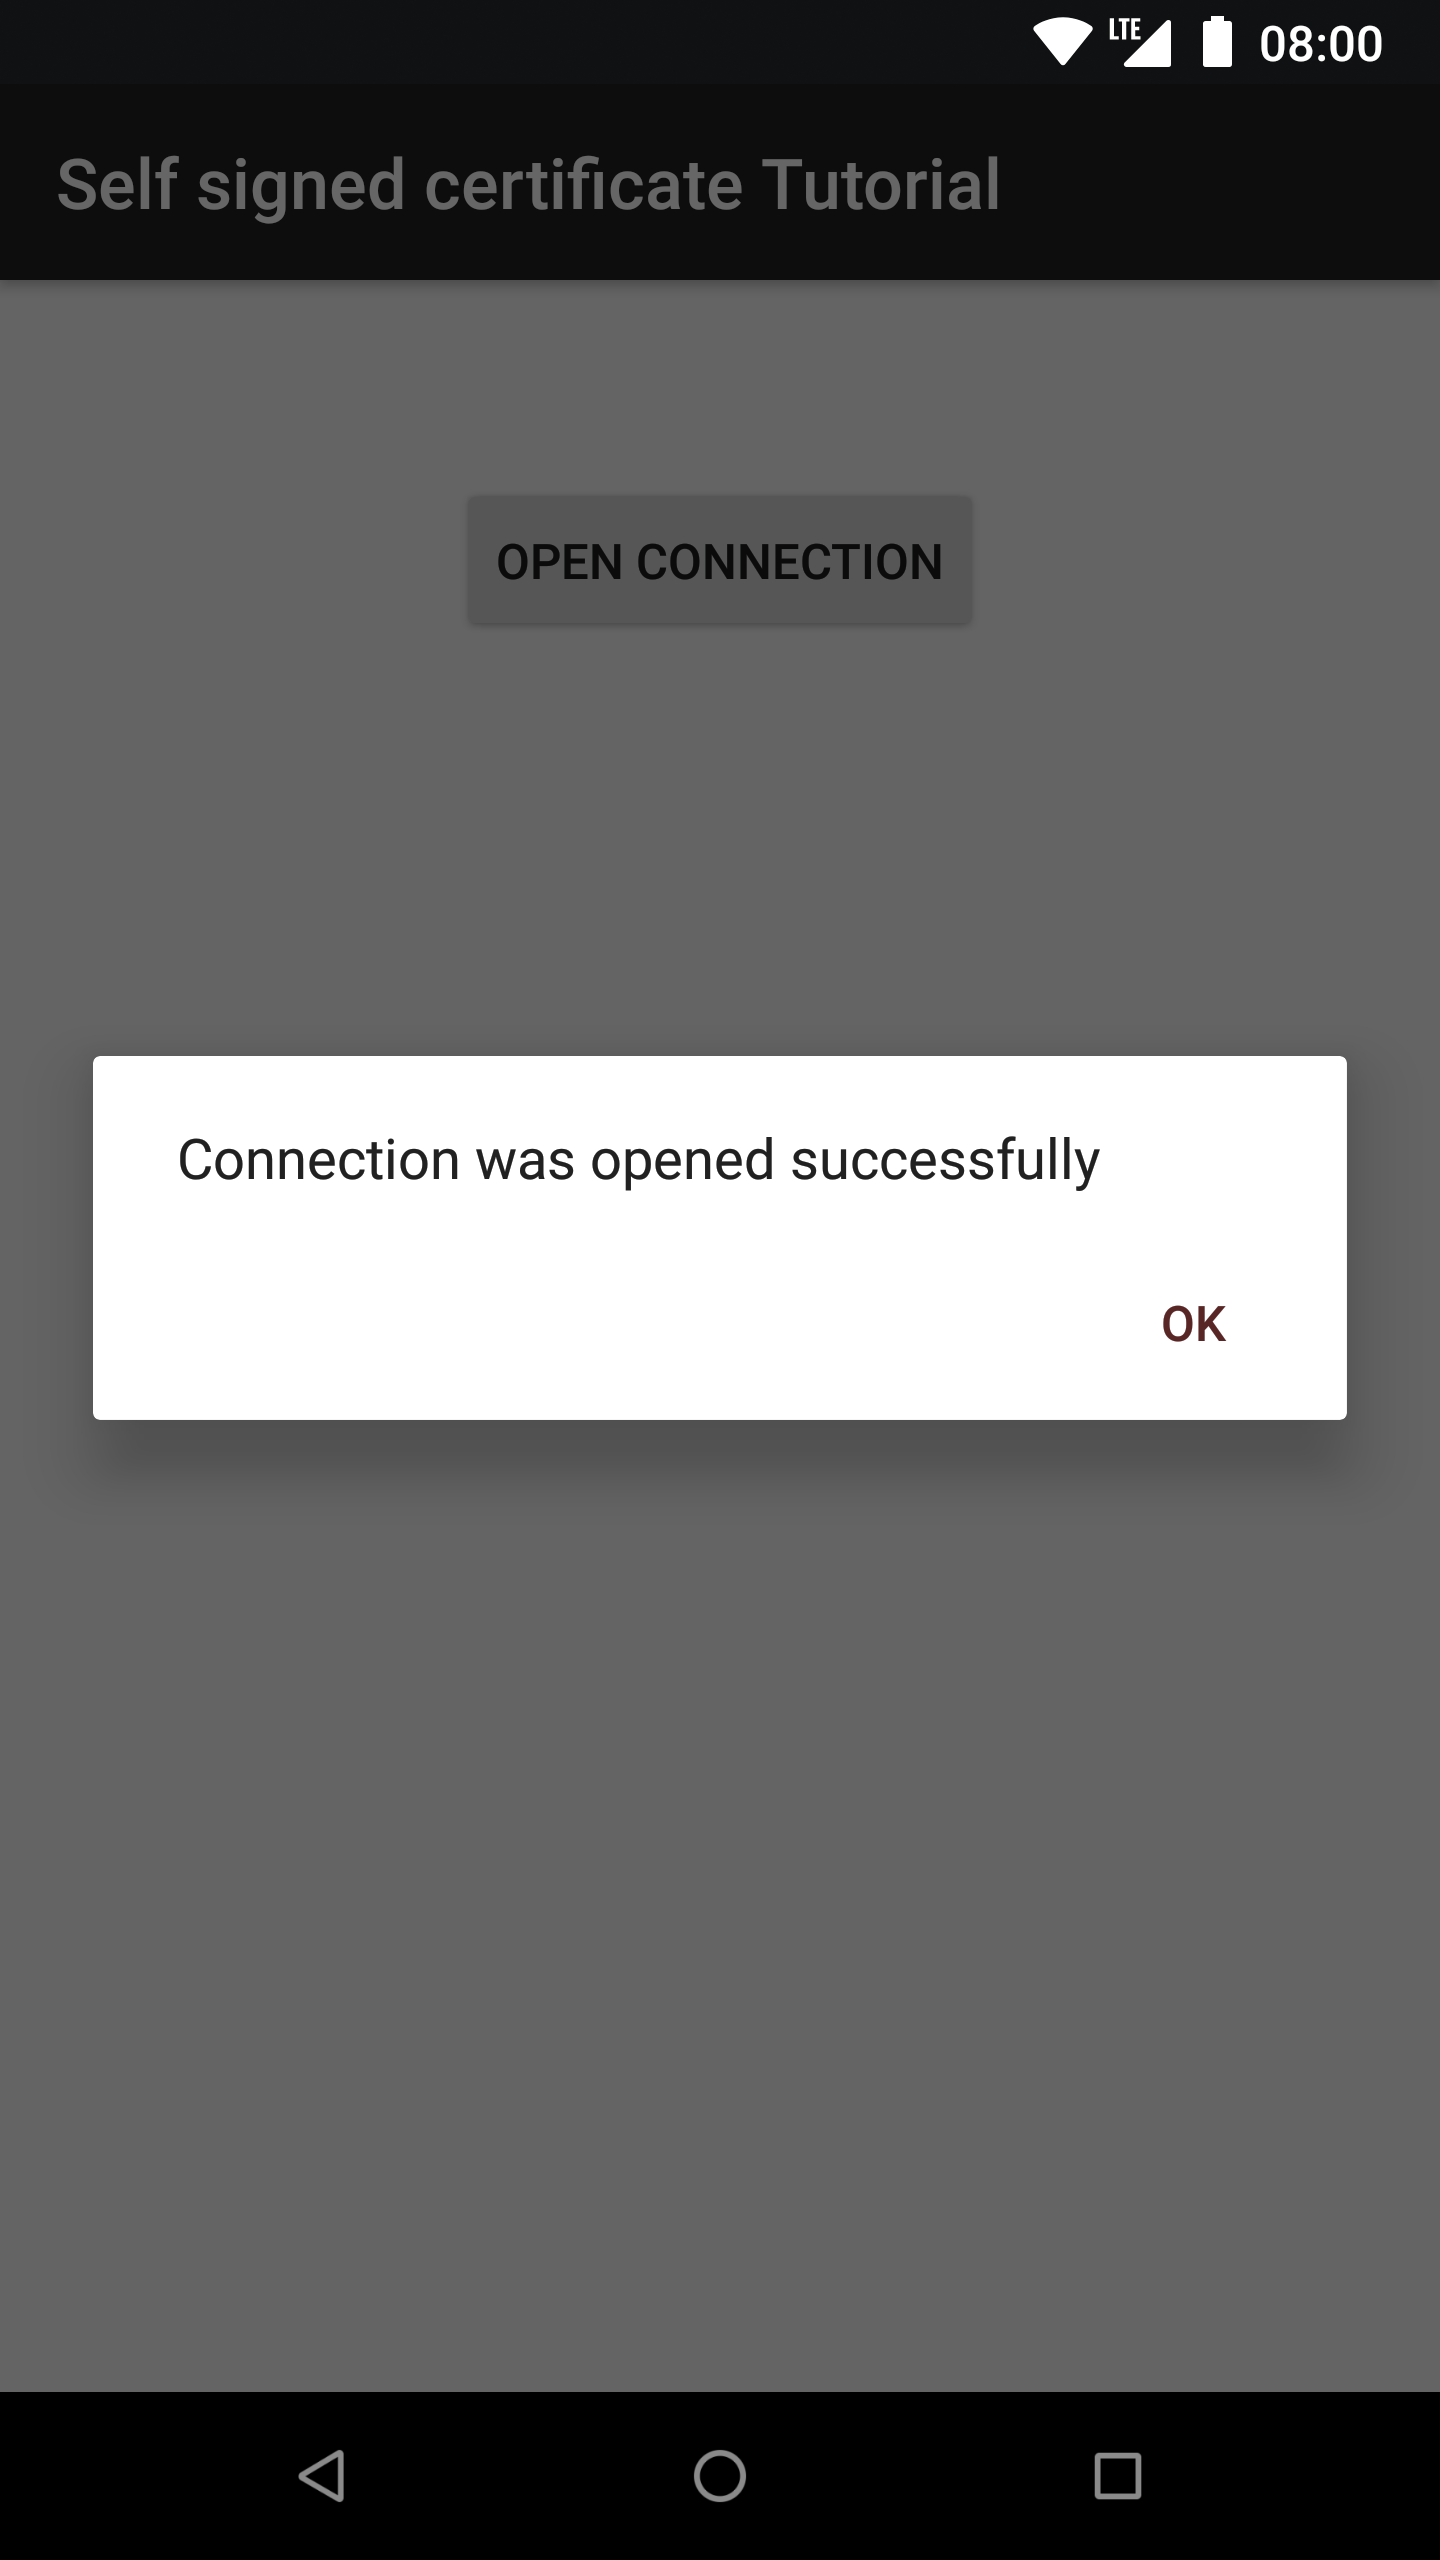 Successful connection